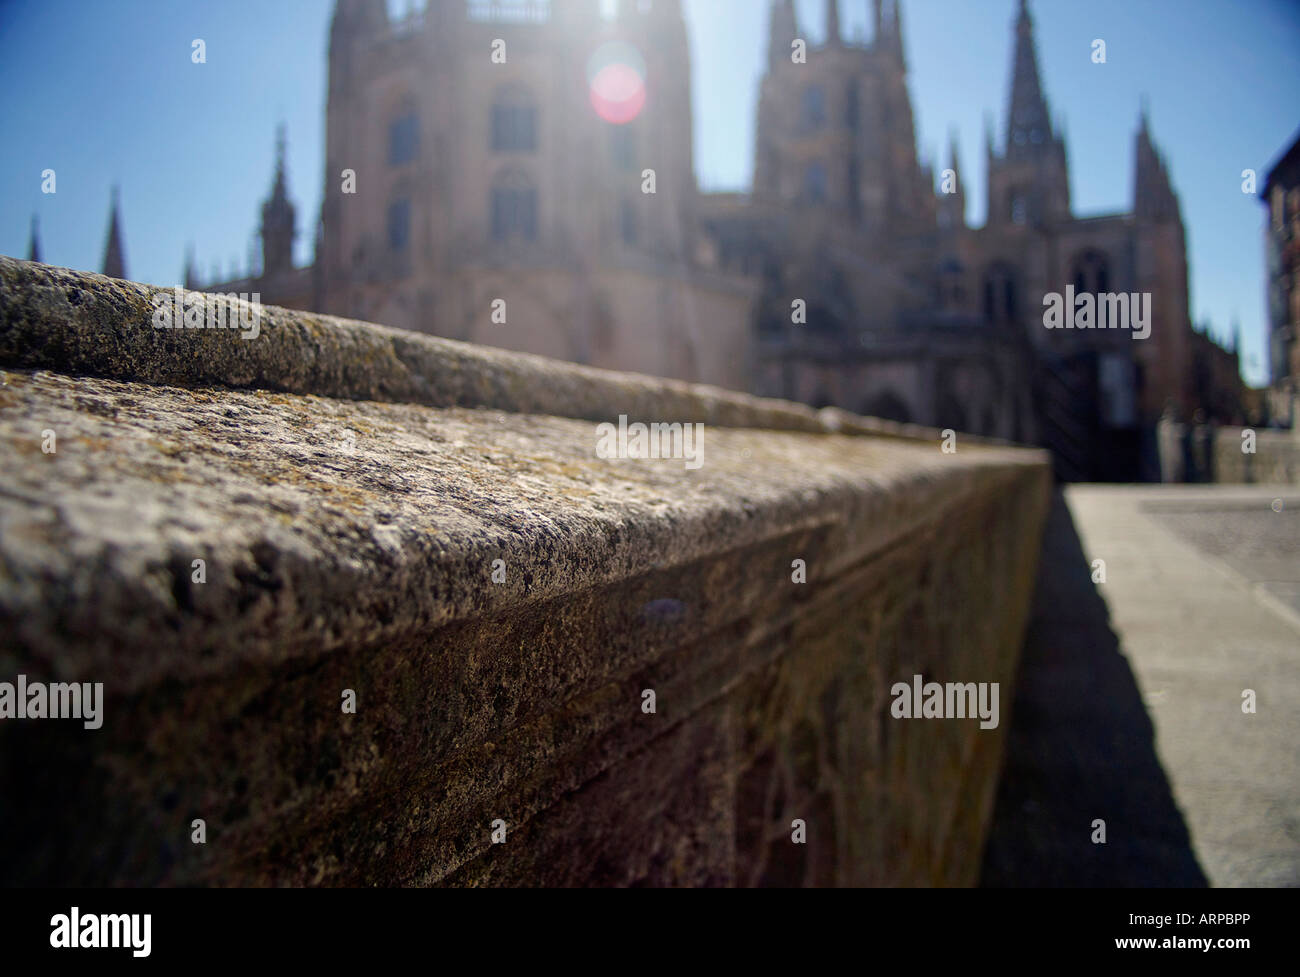 balustrade of stone architectural ornamental element of the burgos cathedral Stock Photo